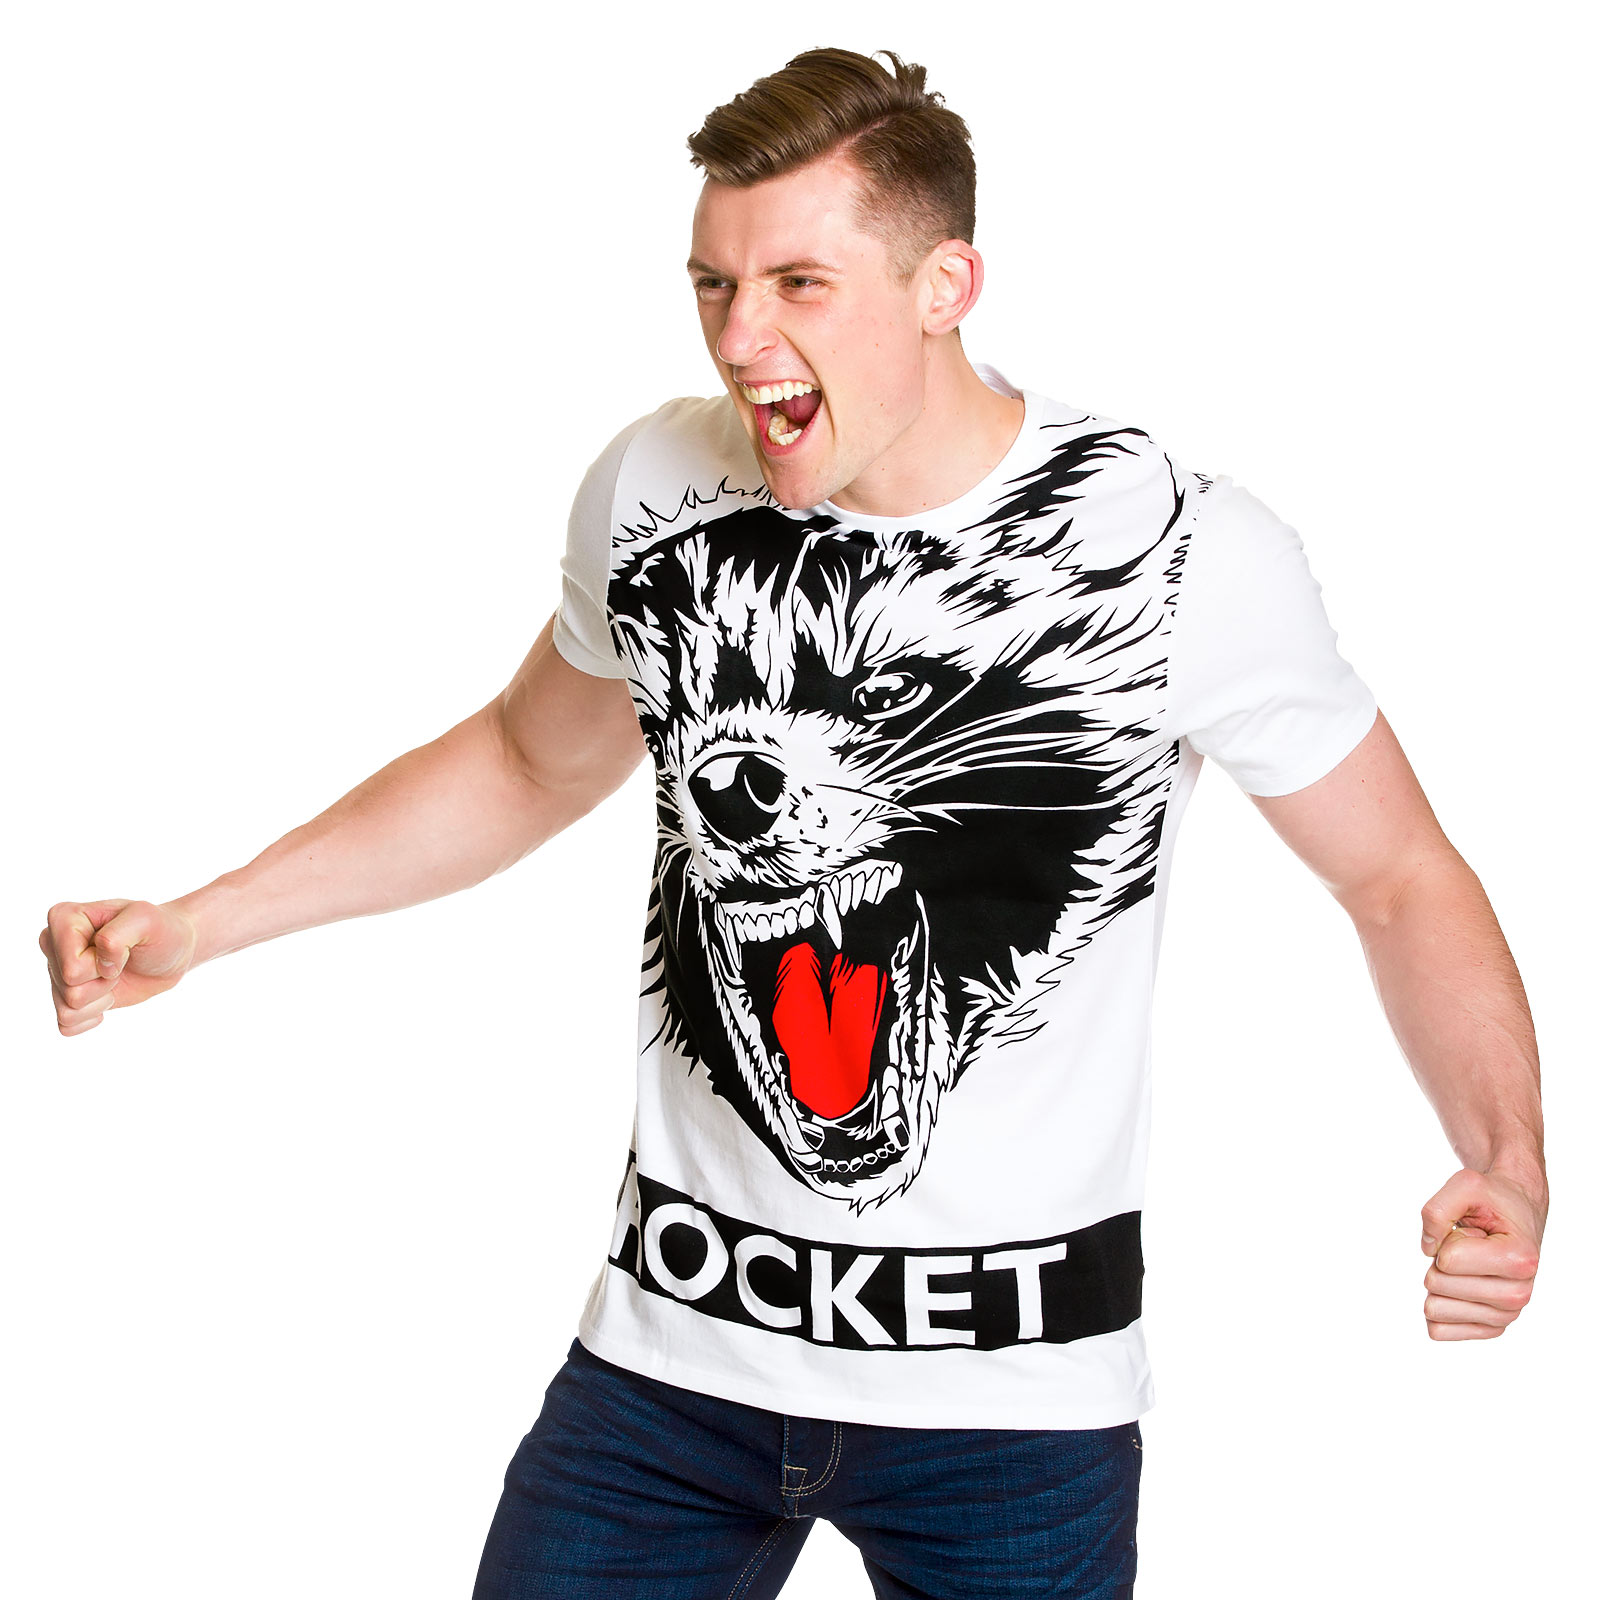 Guardians of the Galaxy - Rocket Full Size T-Shirt white